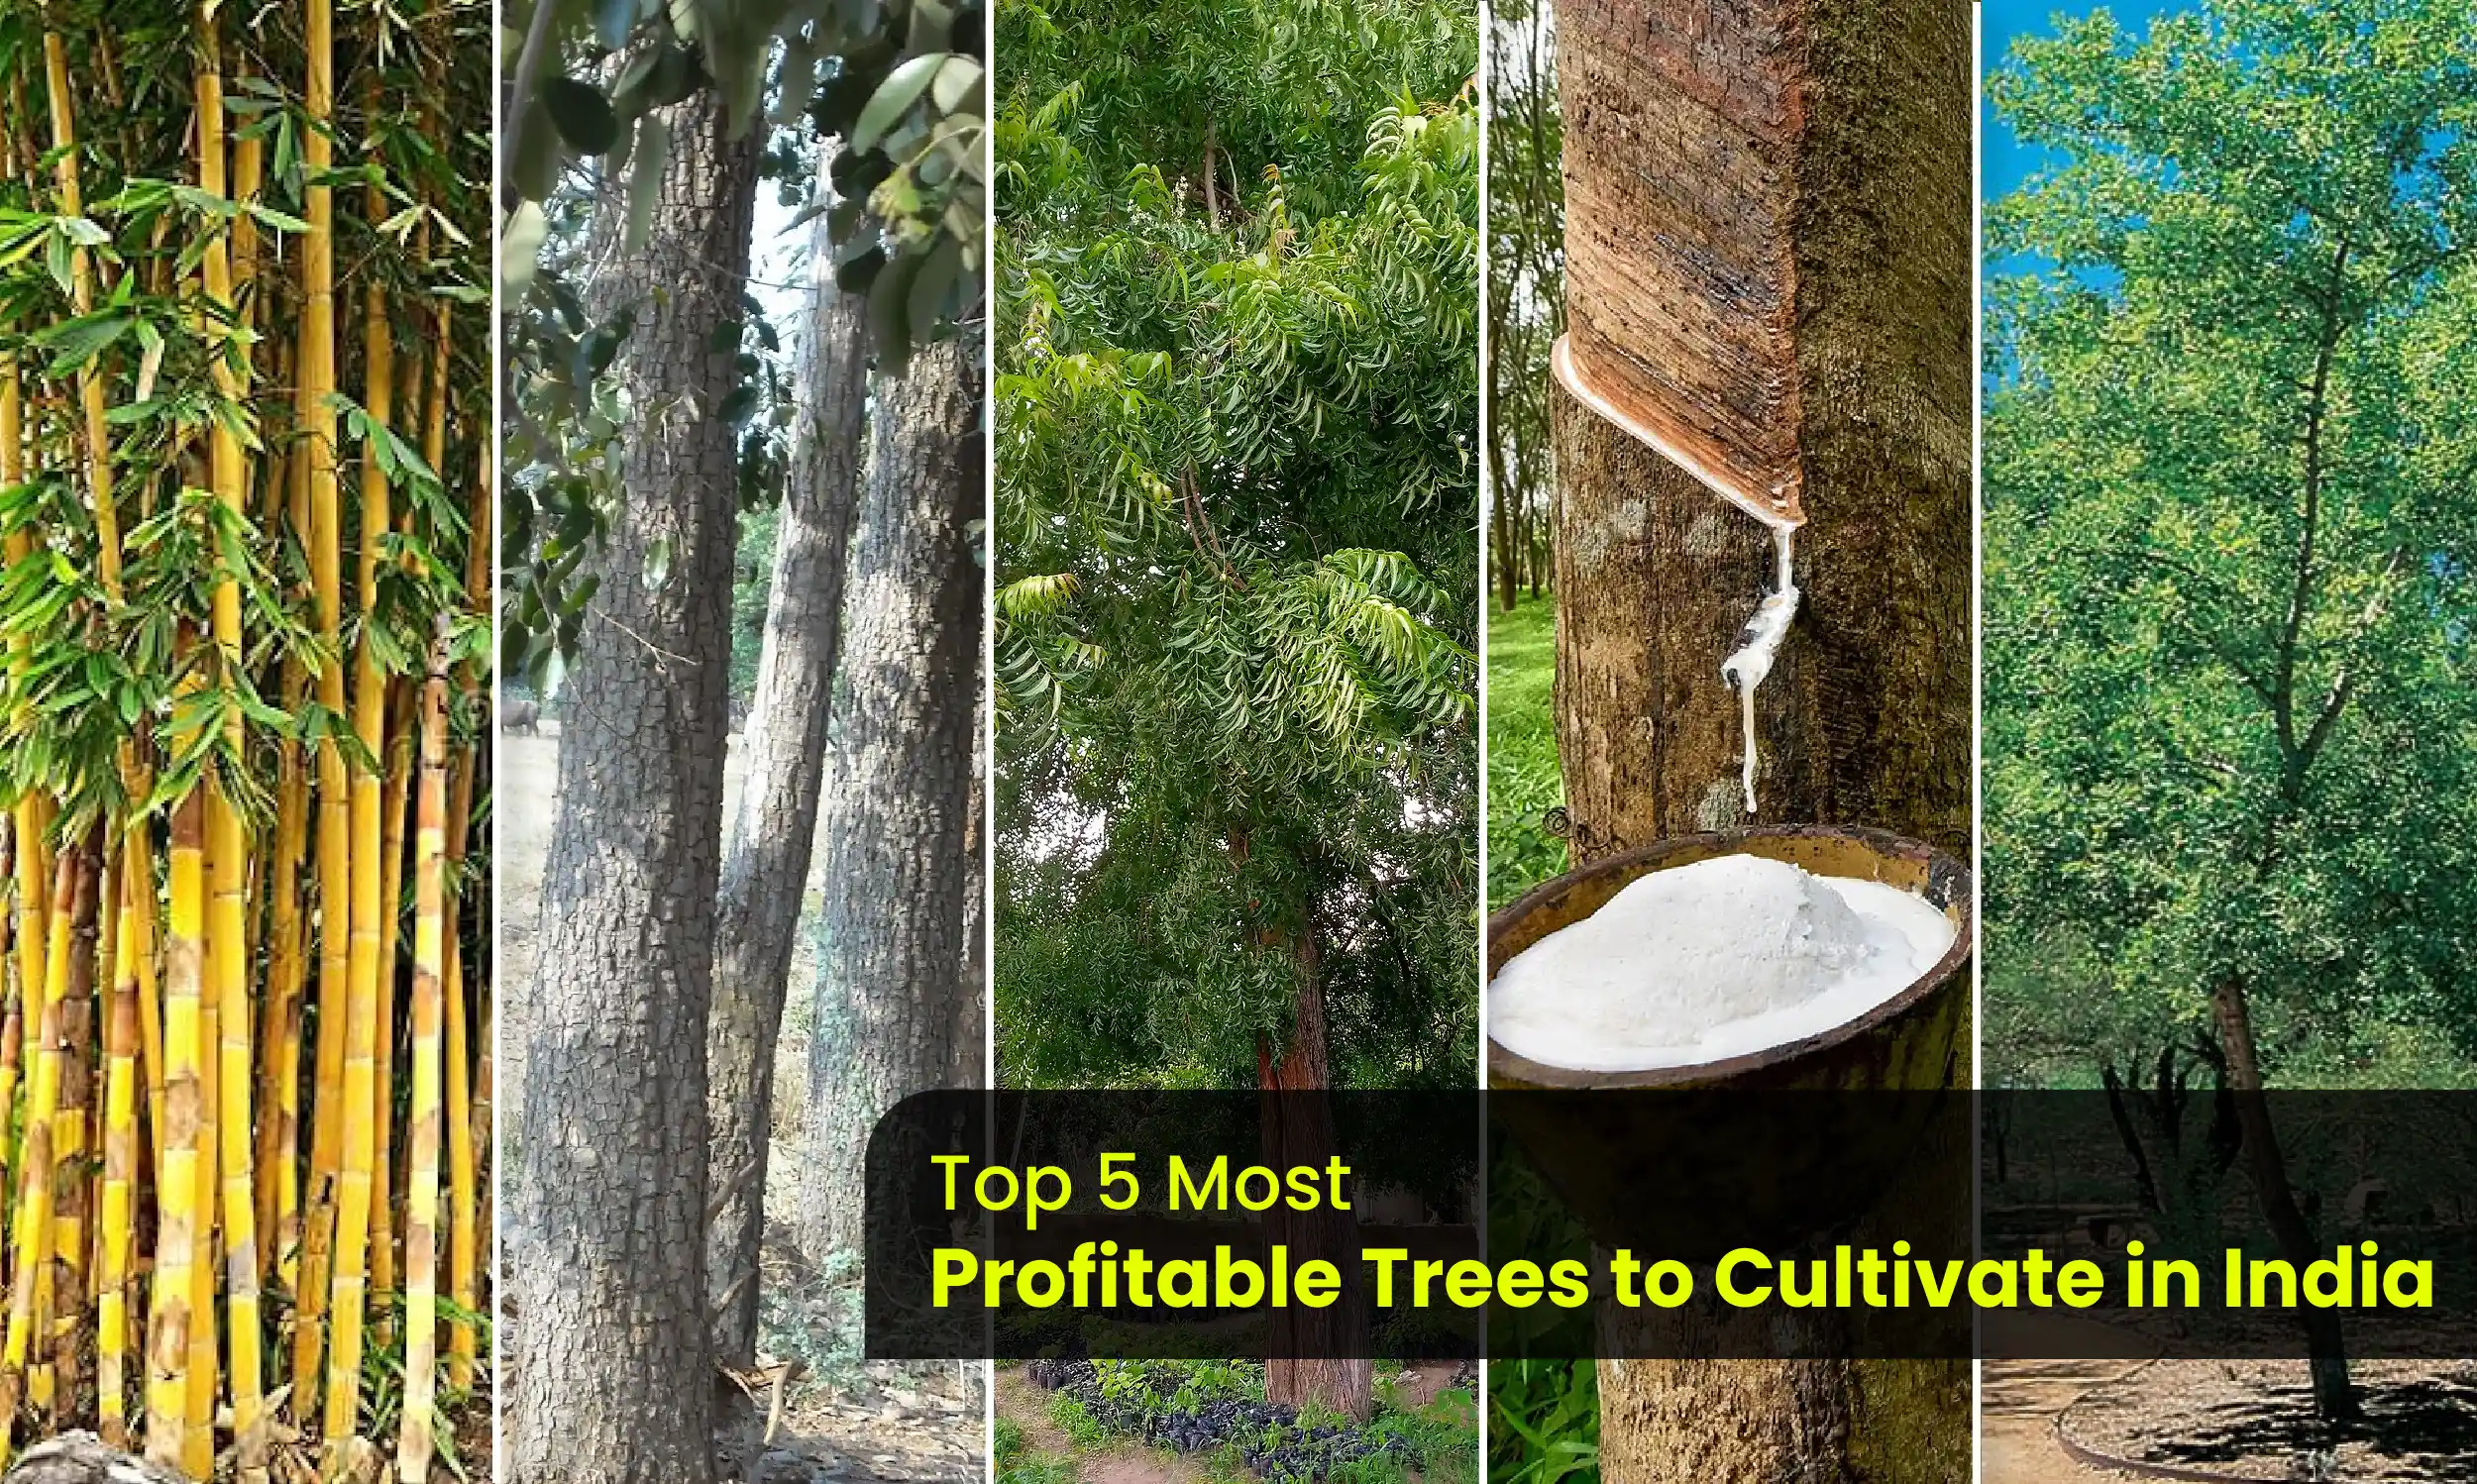 Top 5 Most Profitable Trees for Indian Farmers